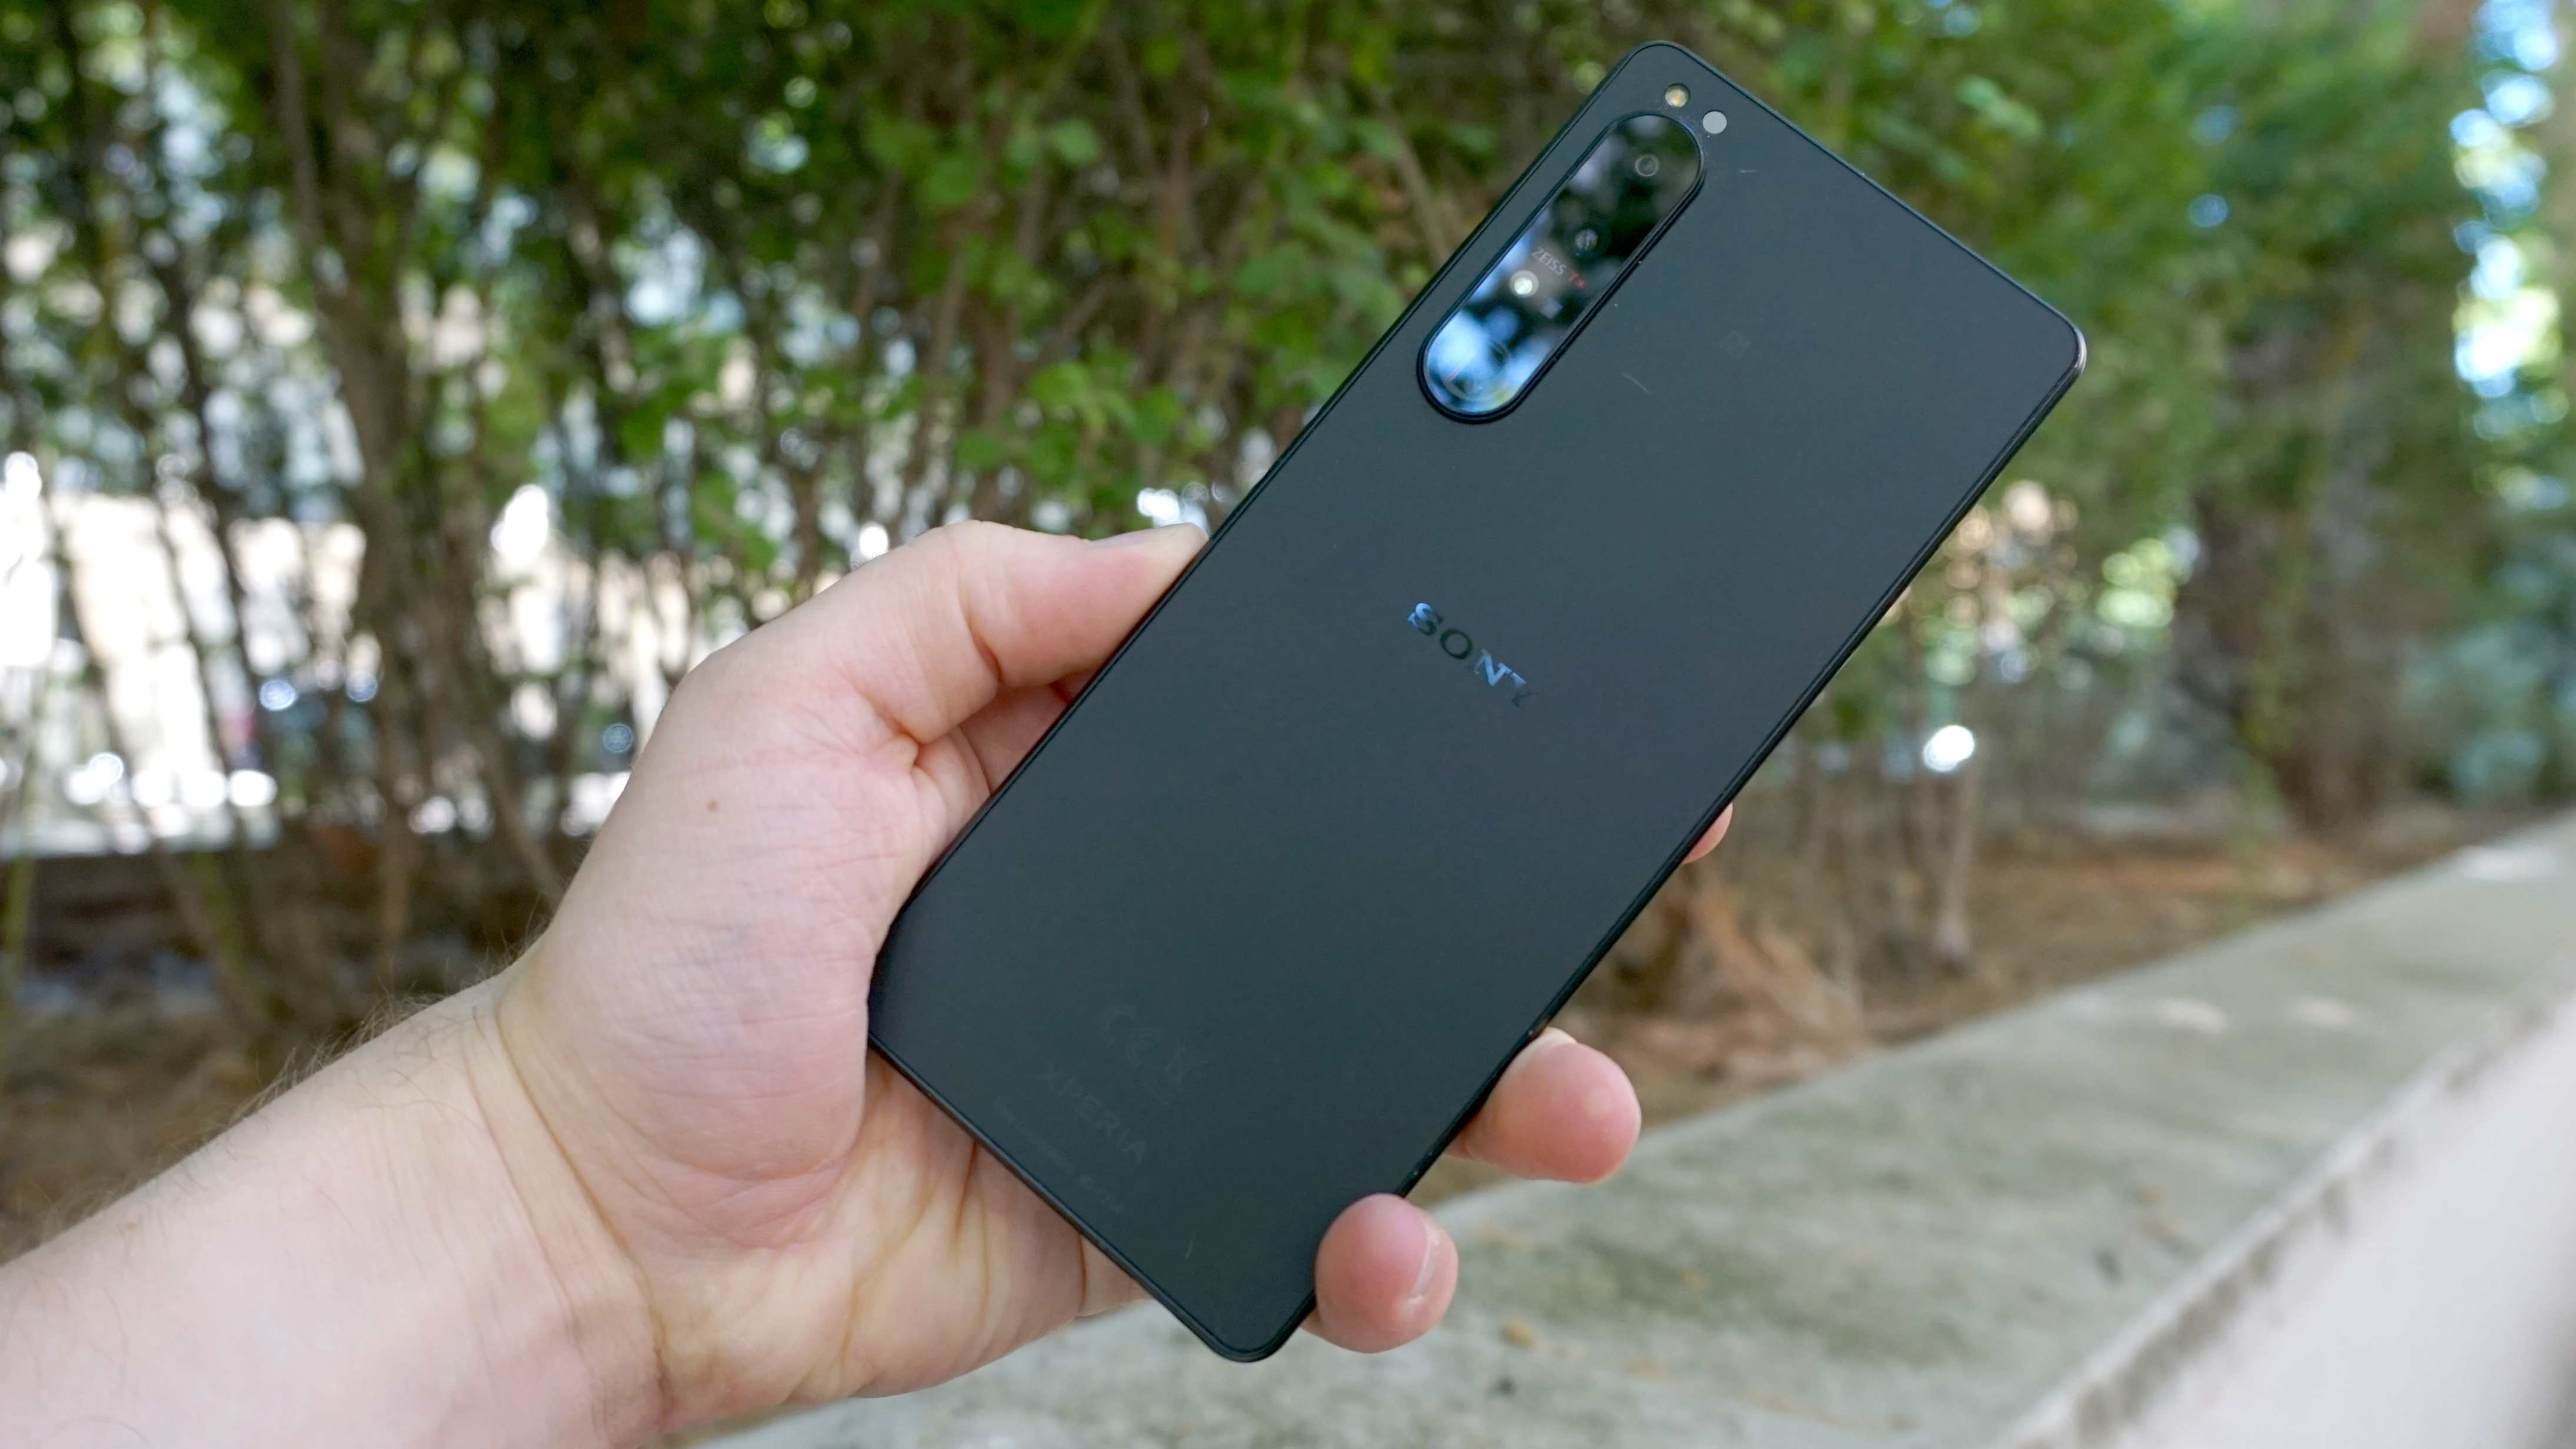 A Sony Xperia 1 IV seen from behind, in someone's hand